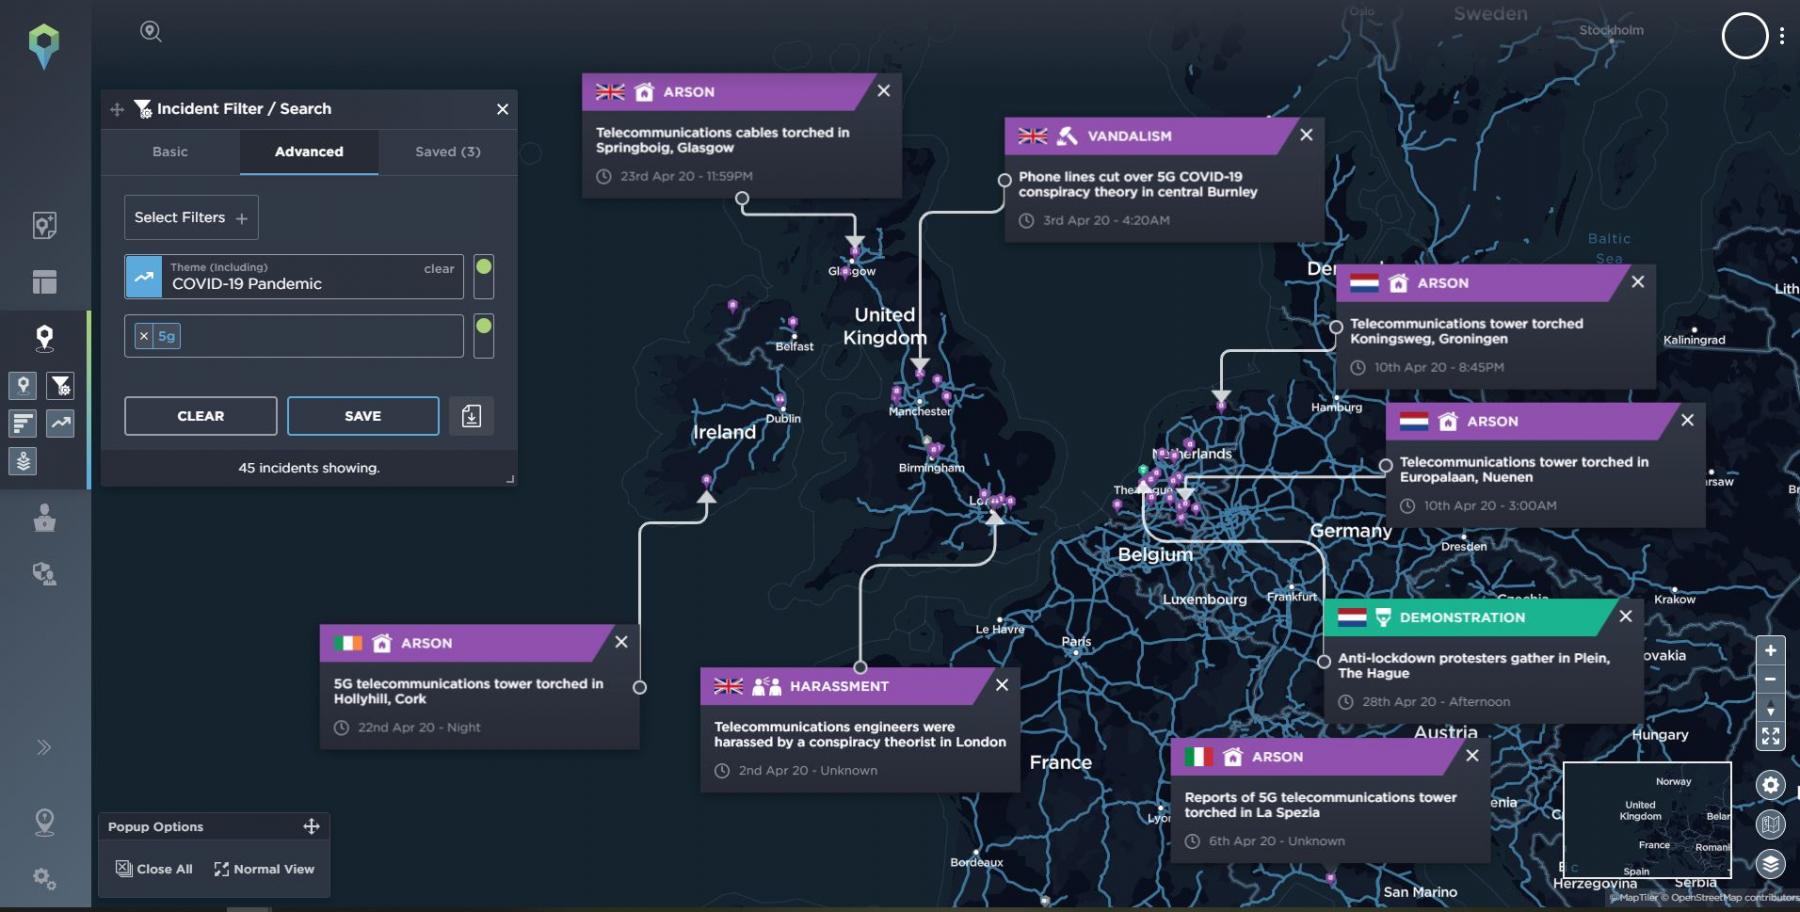 Map highlighting a selection of incidents that show a rise in attacks against 5G masts amidst the conspiracy theory regarding COVID-19